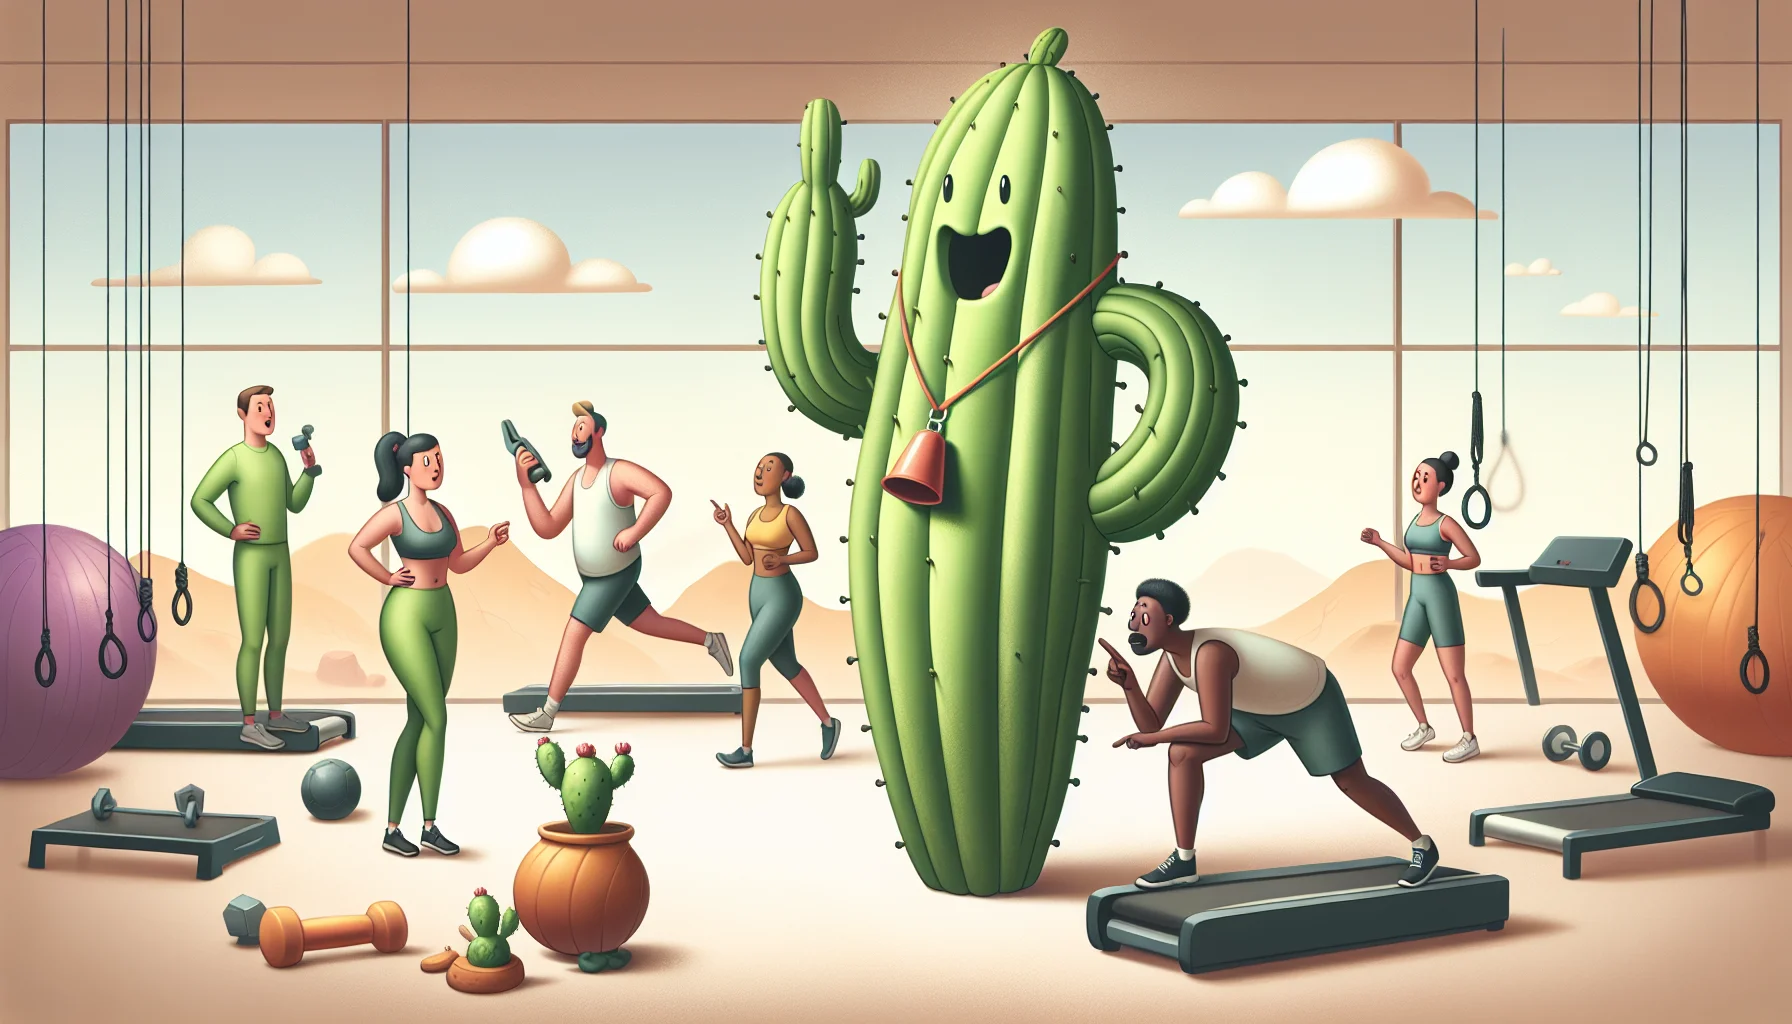 Imagine a humorous scene set in a gym. There's a giant, anthropomorphized Caralluma Fimbriata cactus, known for its natural fitness benefits, wearing a whistle around its neck and acting as a coach. Close by, a diverse group of people exercising - a Caucasian woman lifting weights, a Hispanic man on a treadmill, and a Black woman doing yoga. The cactus is helping them, encouraging them while providing tips. The atmosphere is light-hearted, warm and motivational, inspiring more people to join in this holistic approach towards fitness.